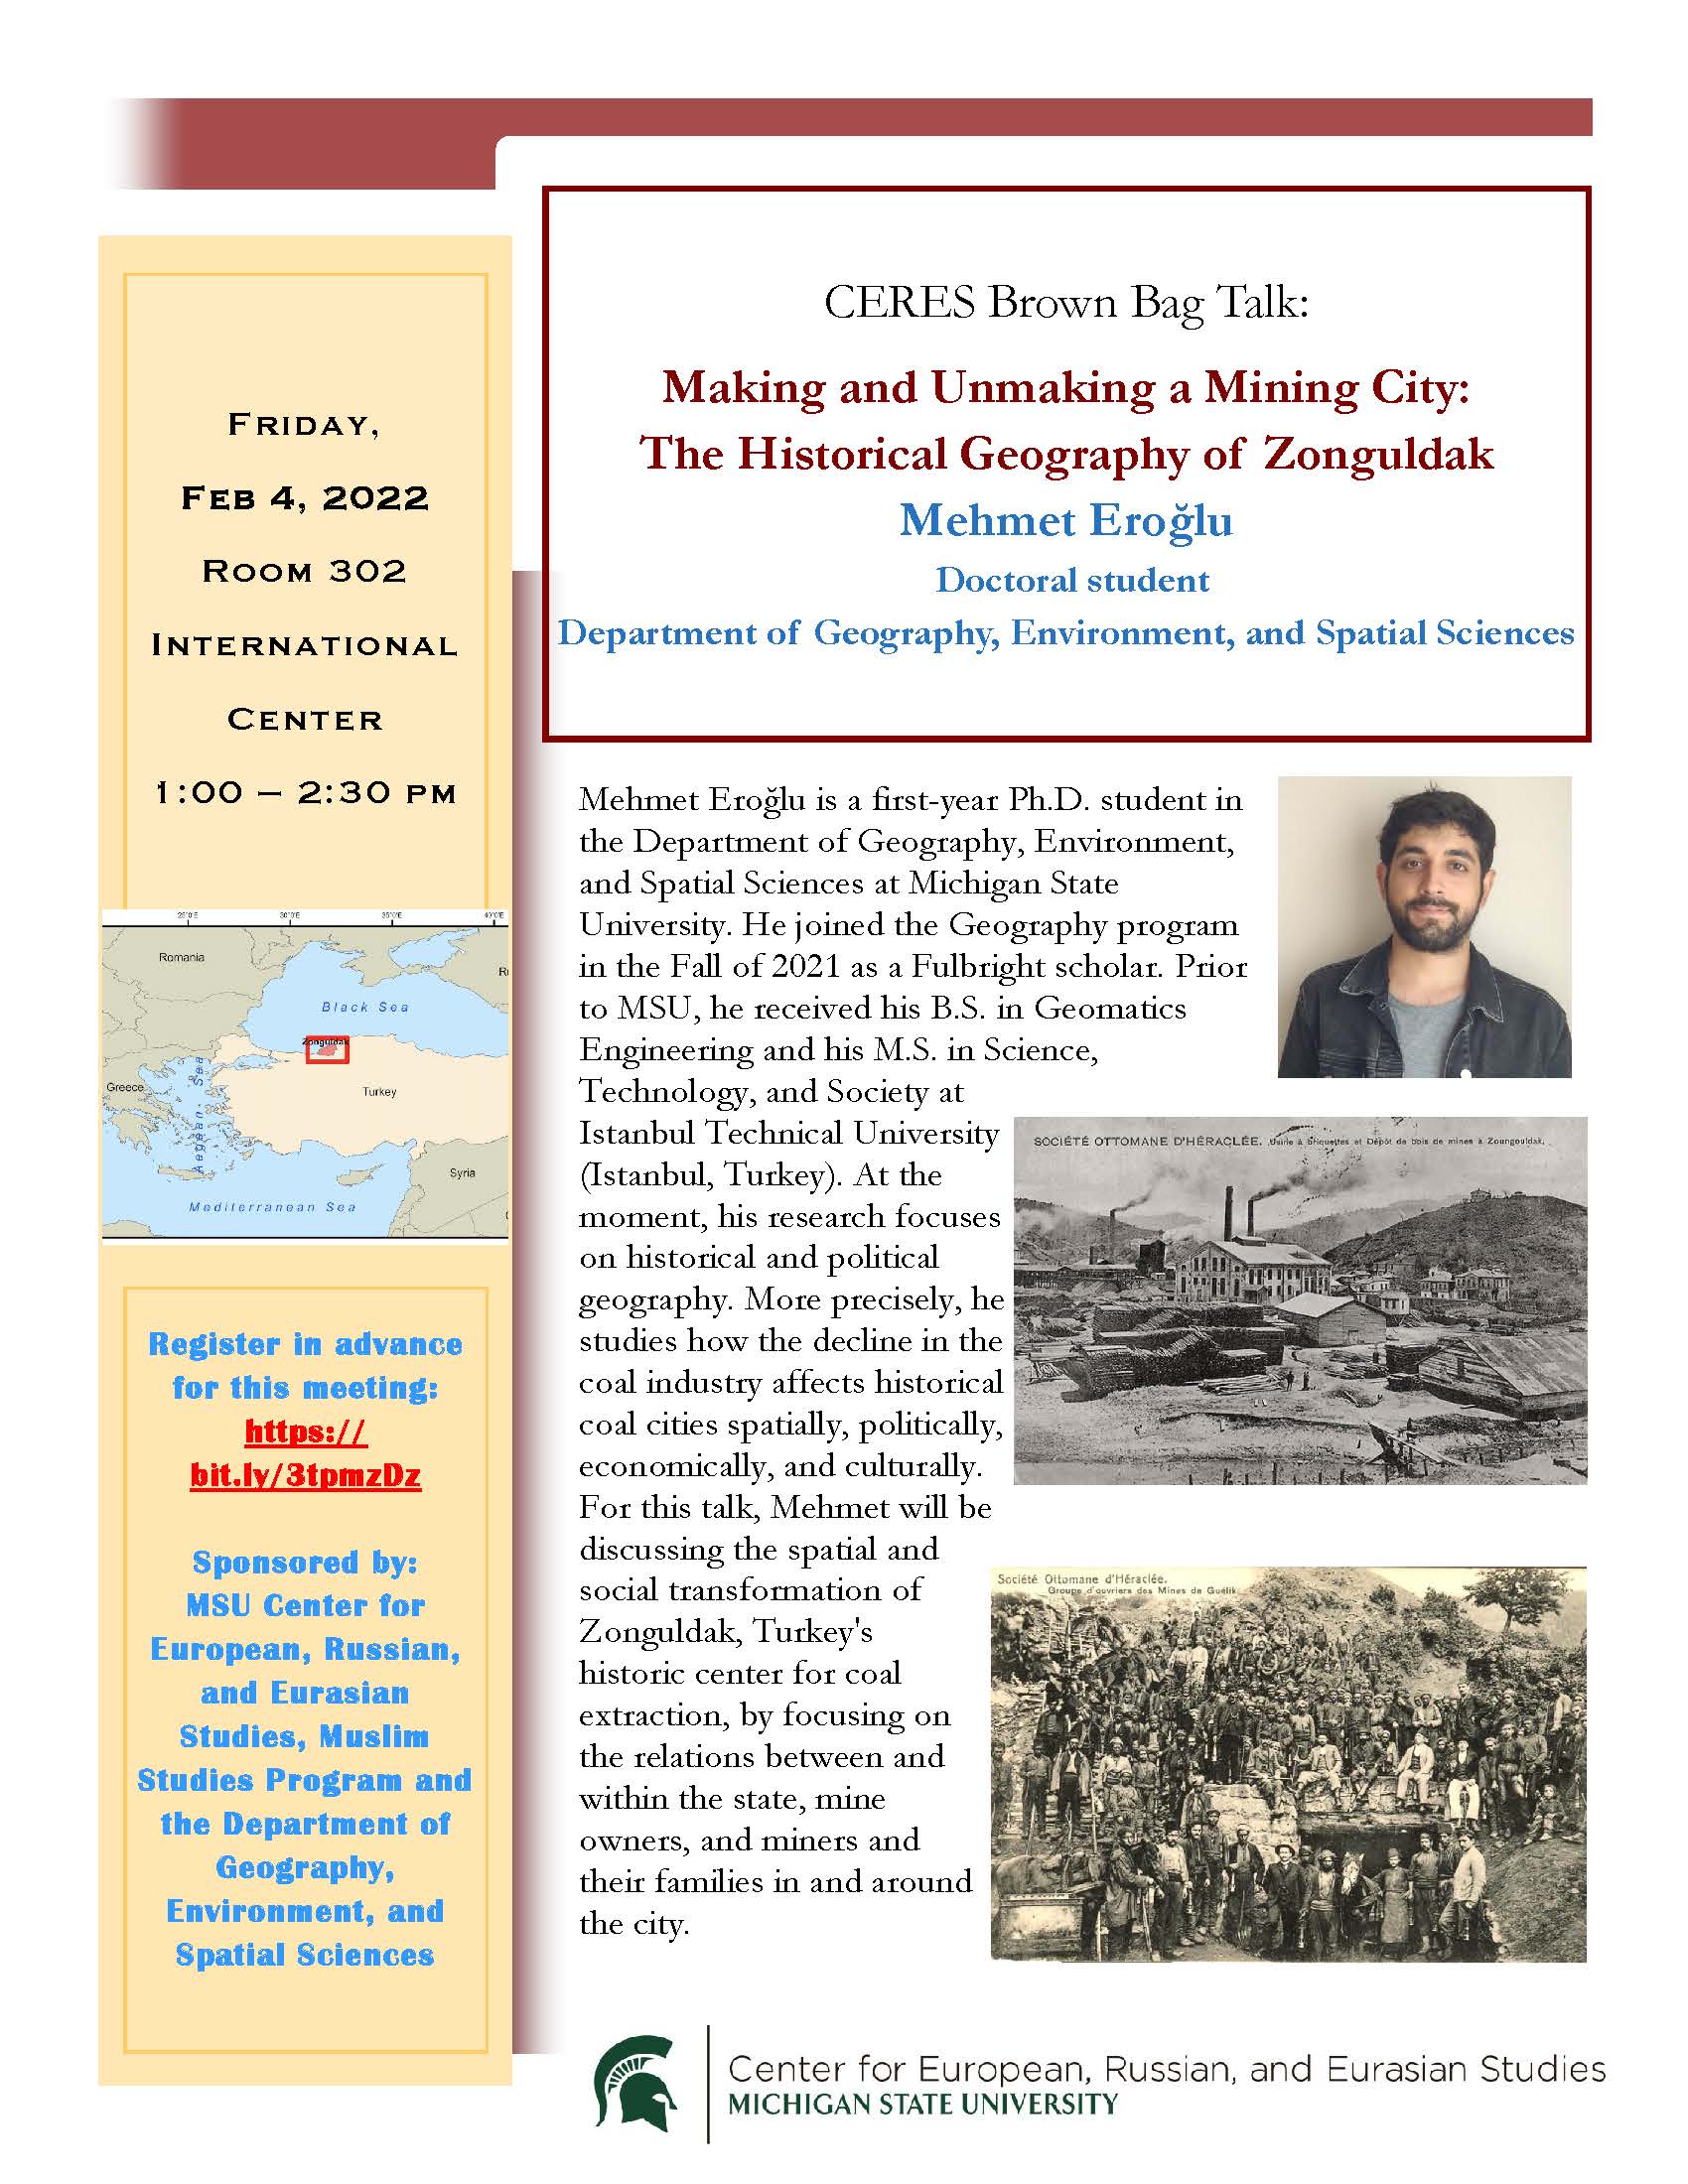 Flyer: CERES Brown Bag Talk: Making and Unmaking a Mining City: The Historical Geography of Zonguldak by Mehmet Eroğlu